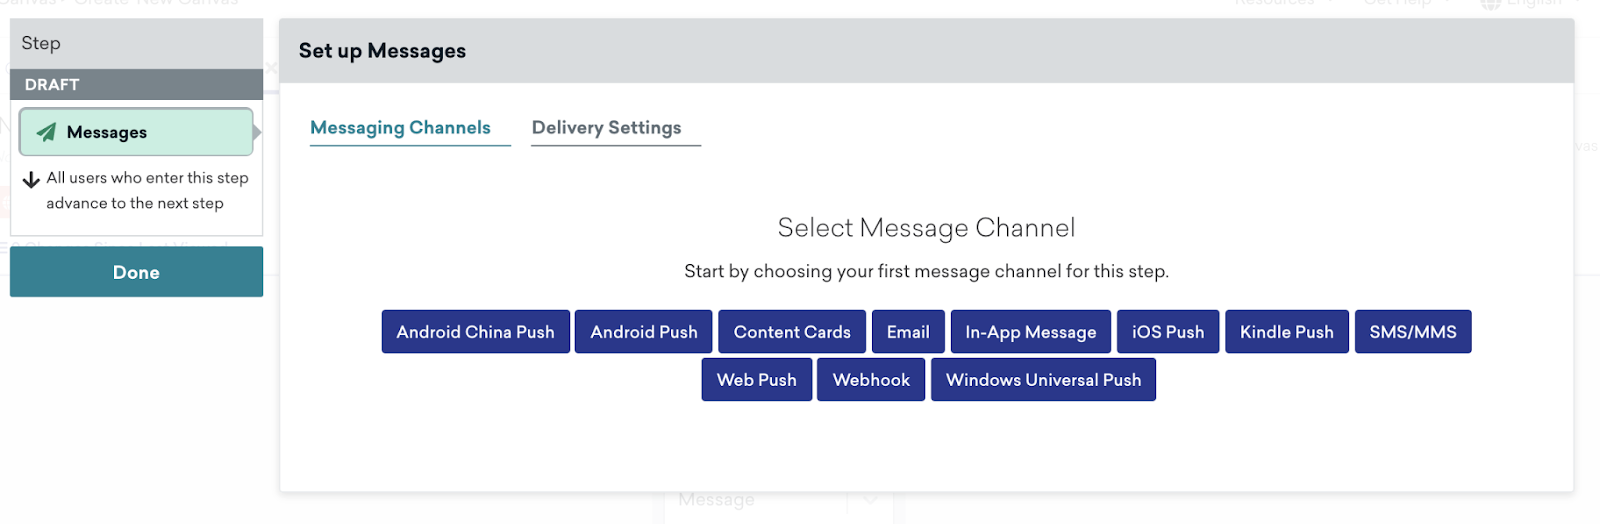 Set up Messages settings for a Message step that includes the option to select your message channel and customize delivery settings.